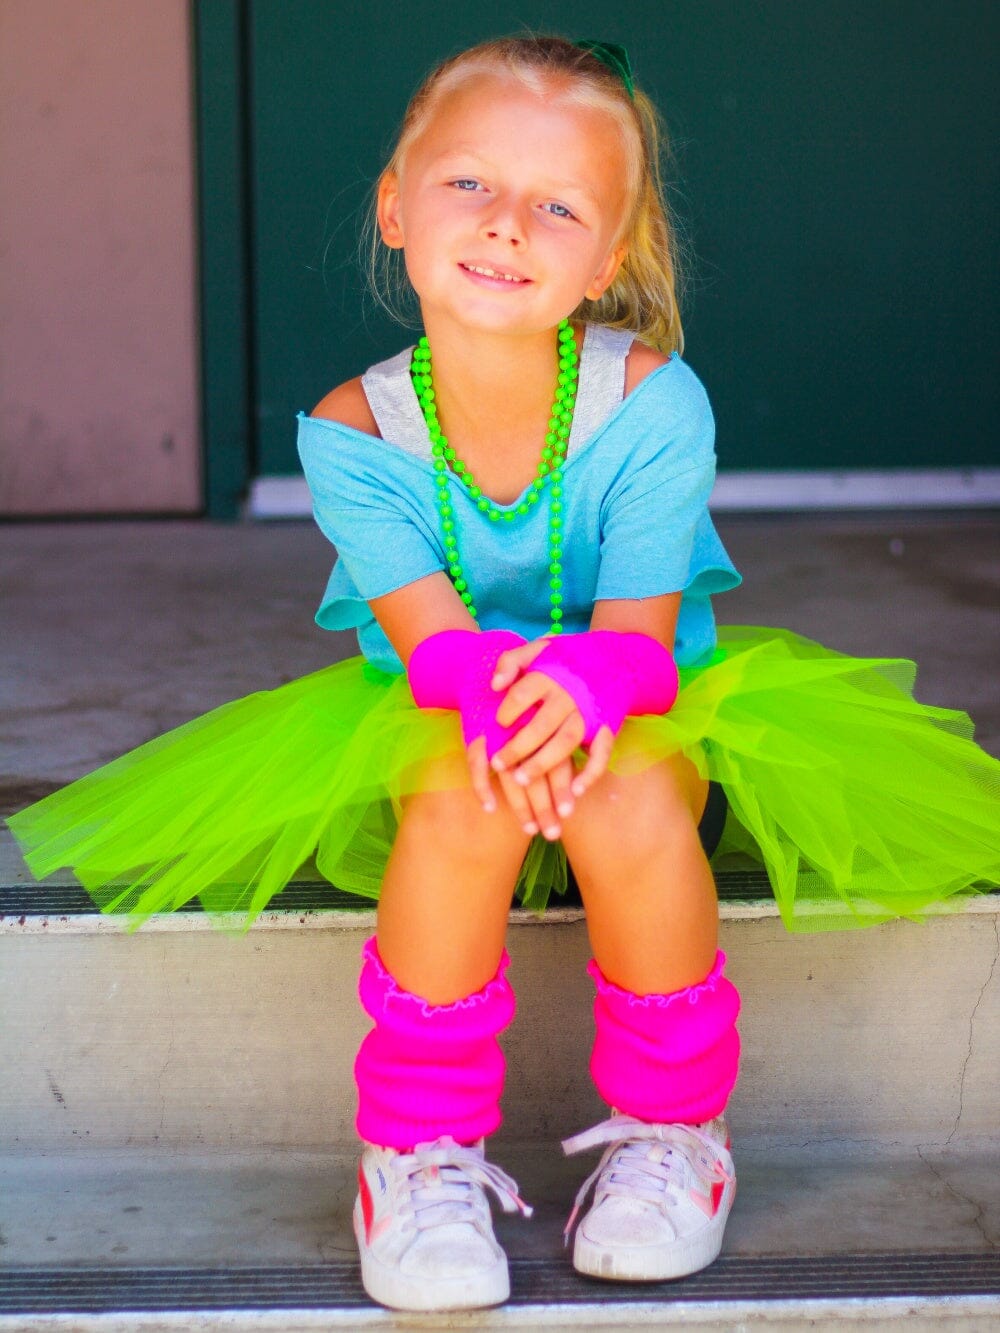 Neon Green 80's Pixie Kids Tutu Costume with Accessories